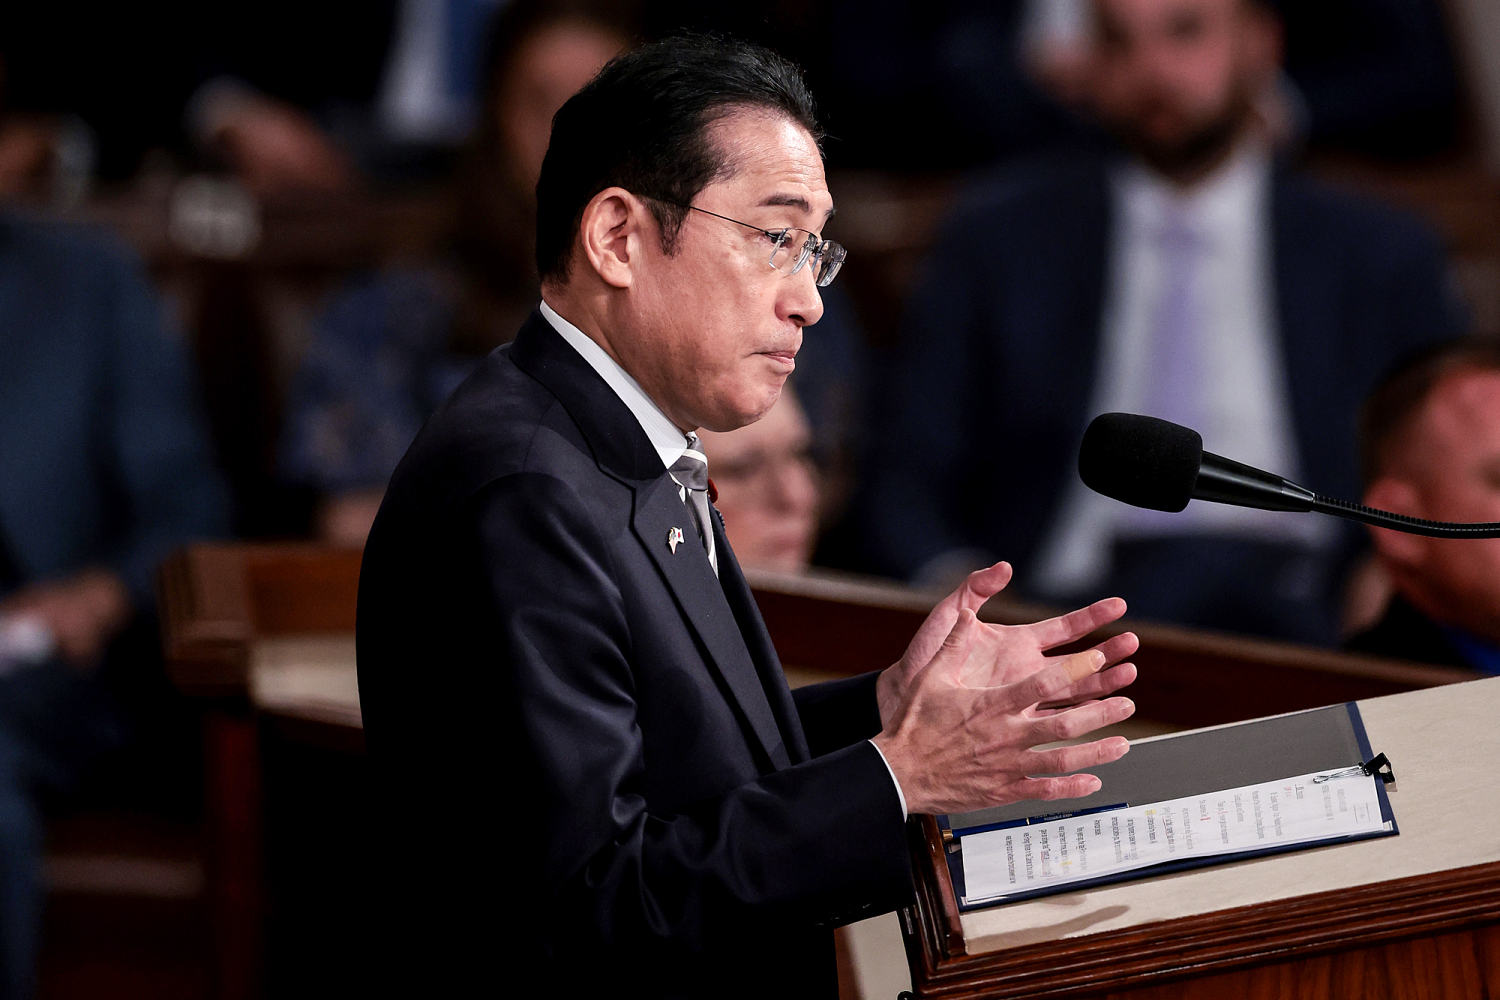 Japanese PM Fumio Kishida addresses U.S. 'self-doubt' about world role in remarks to Congress